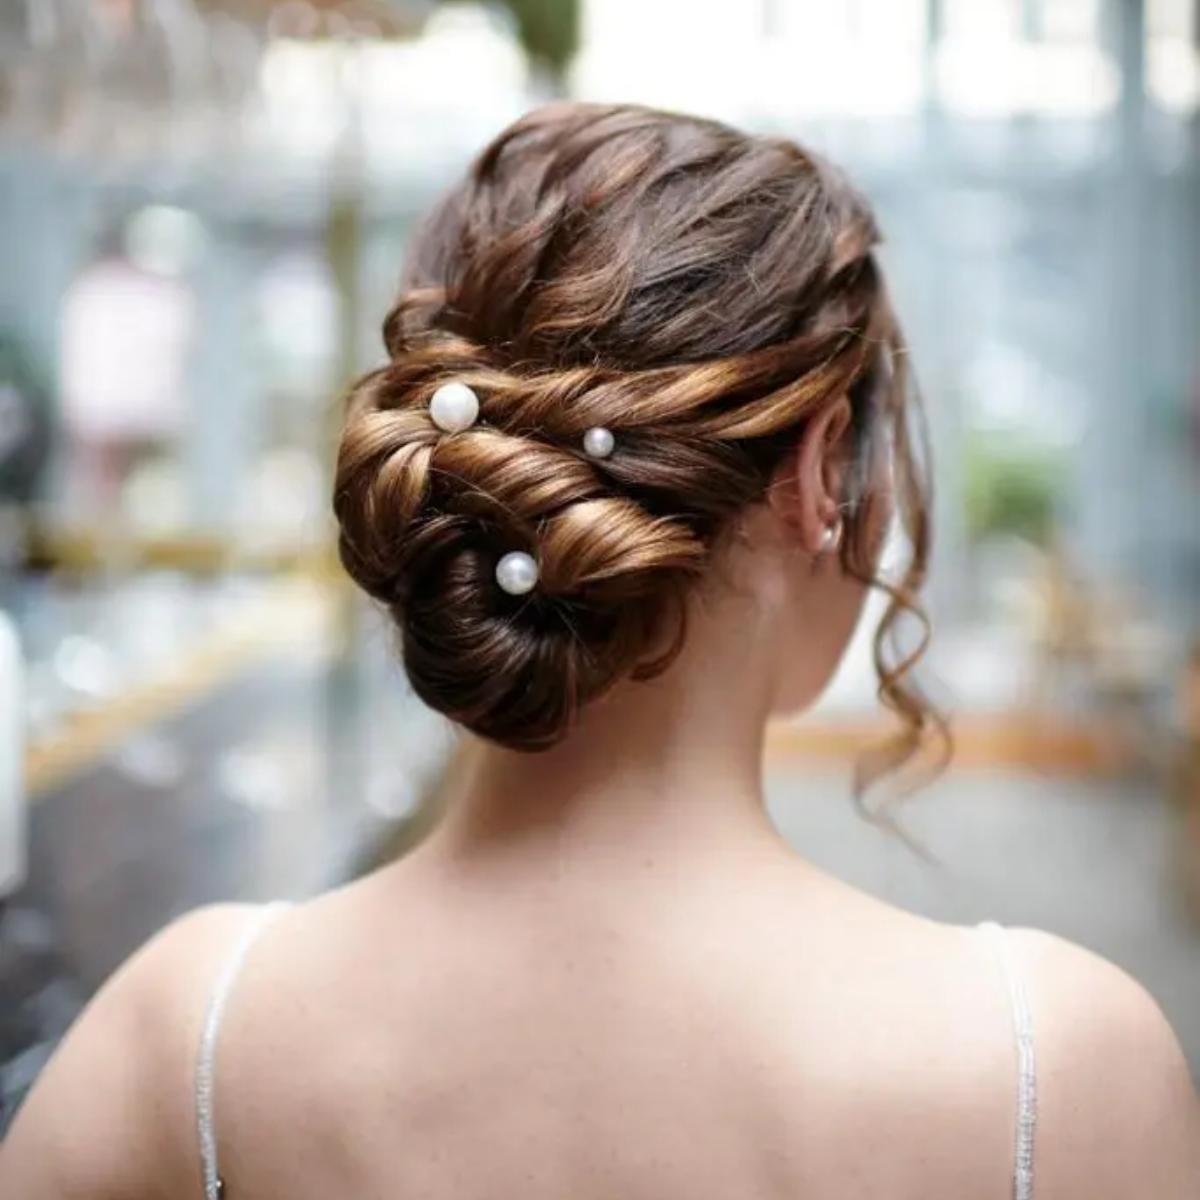 Top 7 wedding hairstyles for afro & curly hair - Kemi Filani News